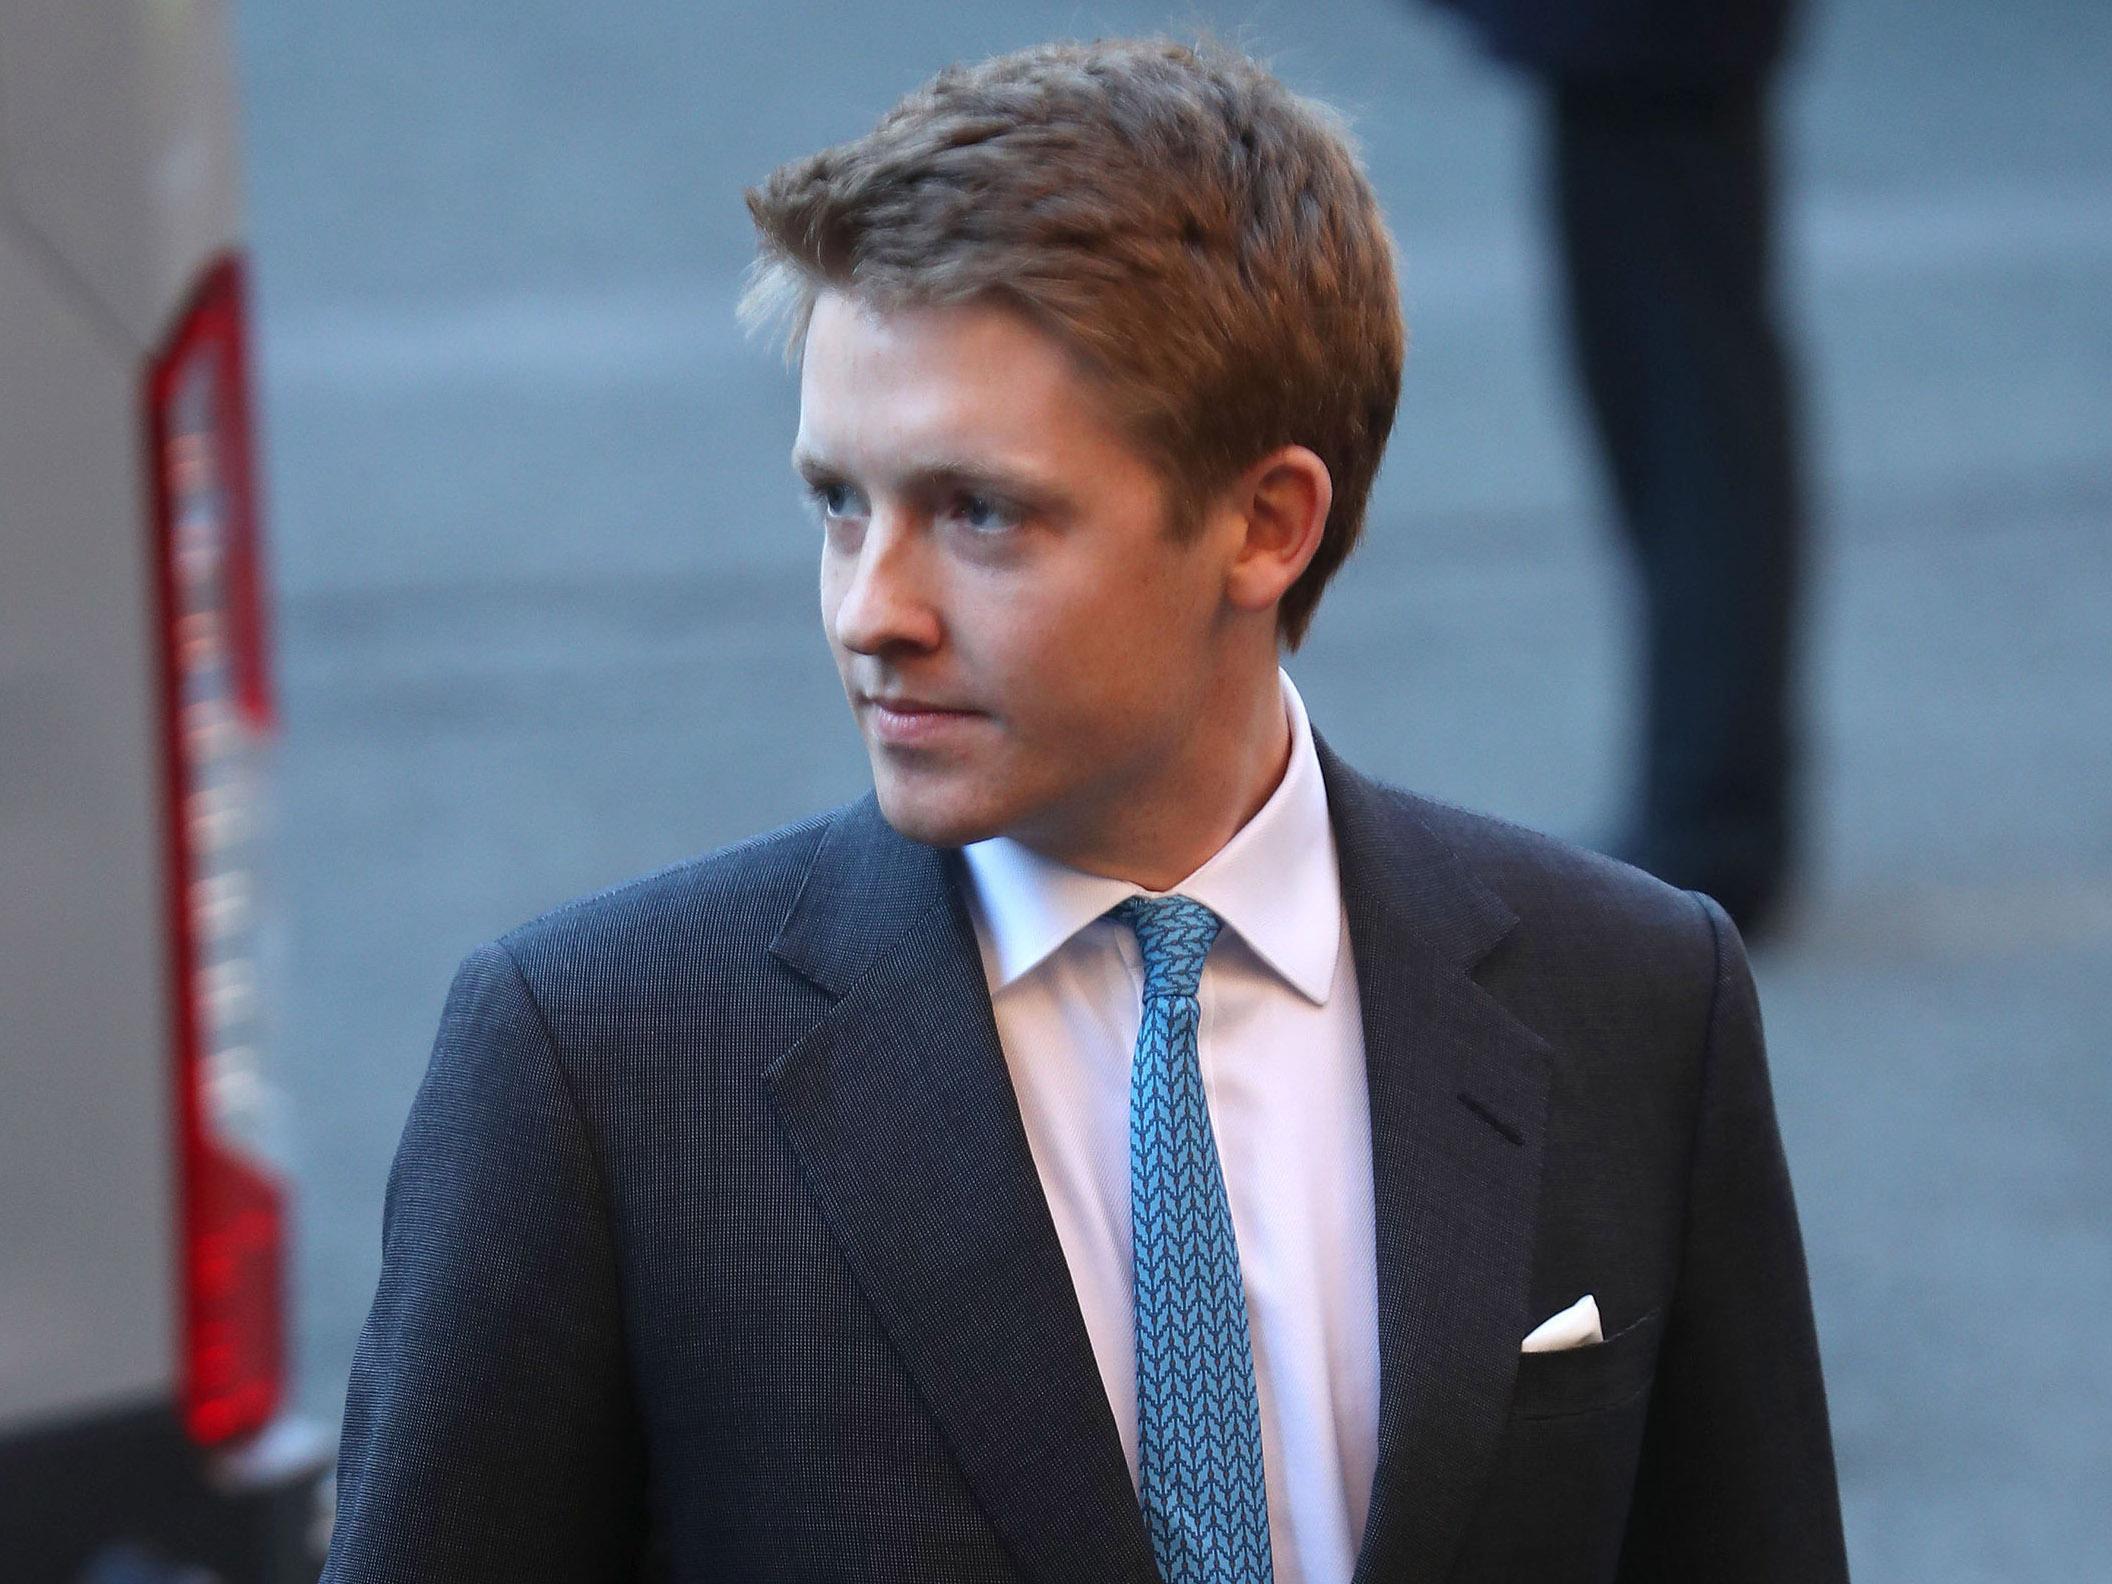 Hugh Grosvenor, now the seventh Duke of Westminster, was passed down his billions tax-free because of a ‘glaring loophole’ in the law